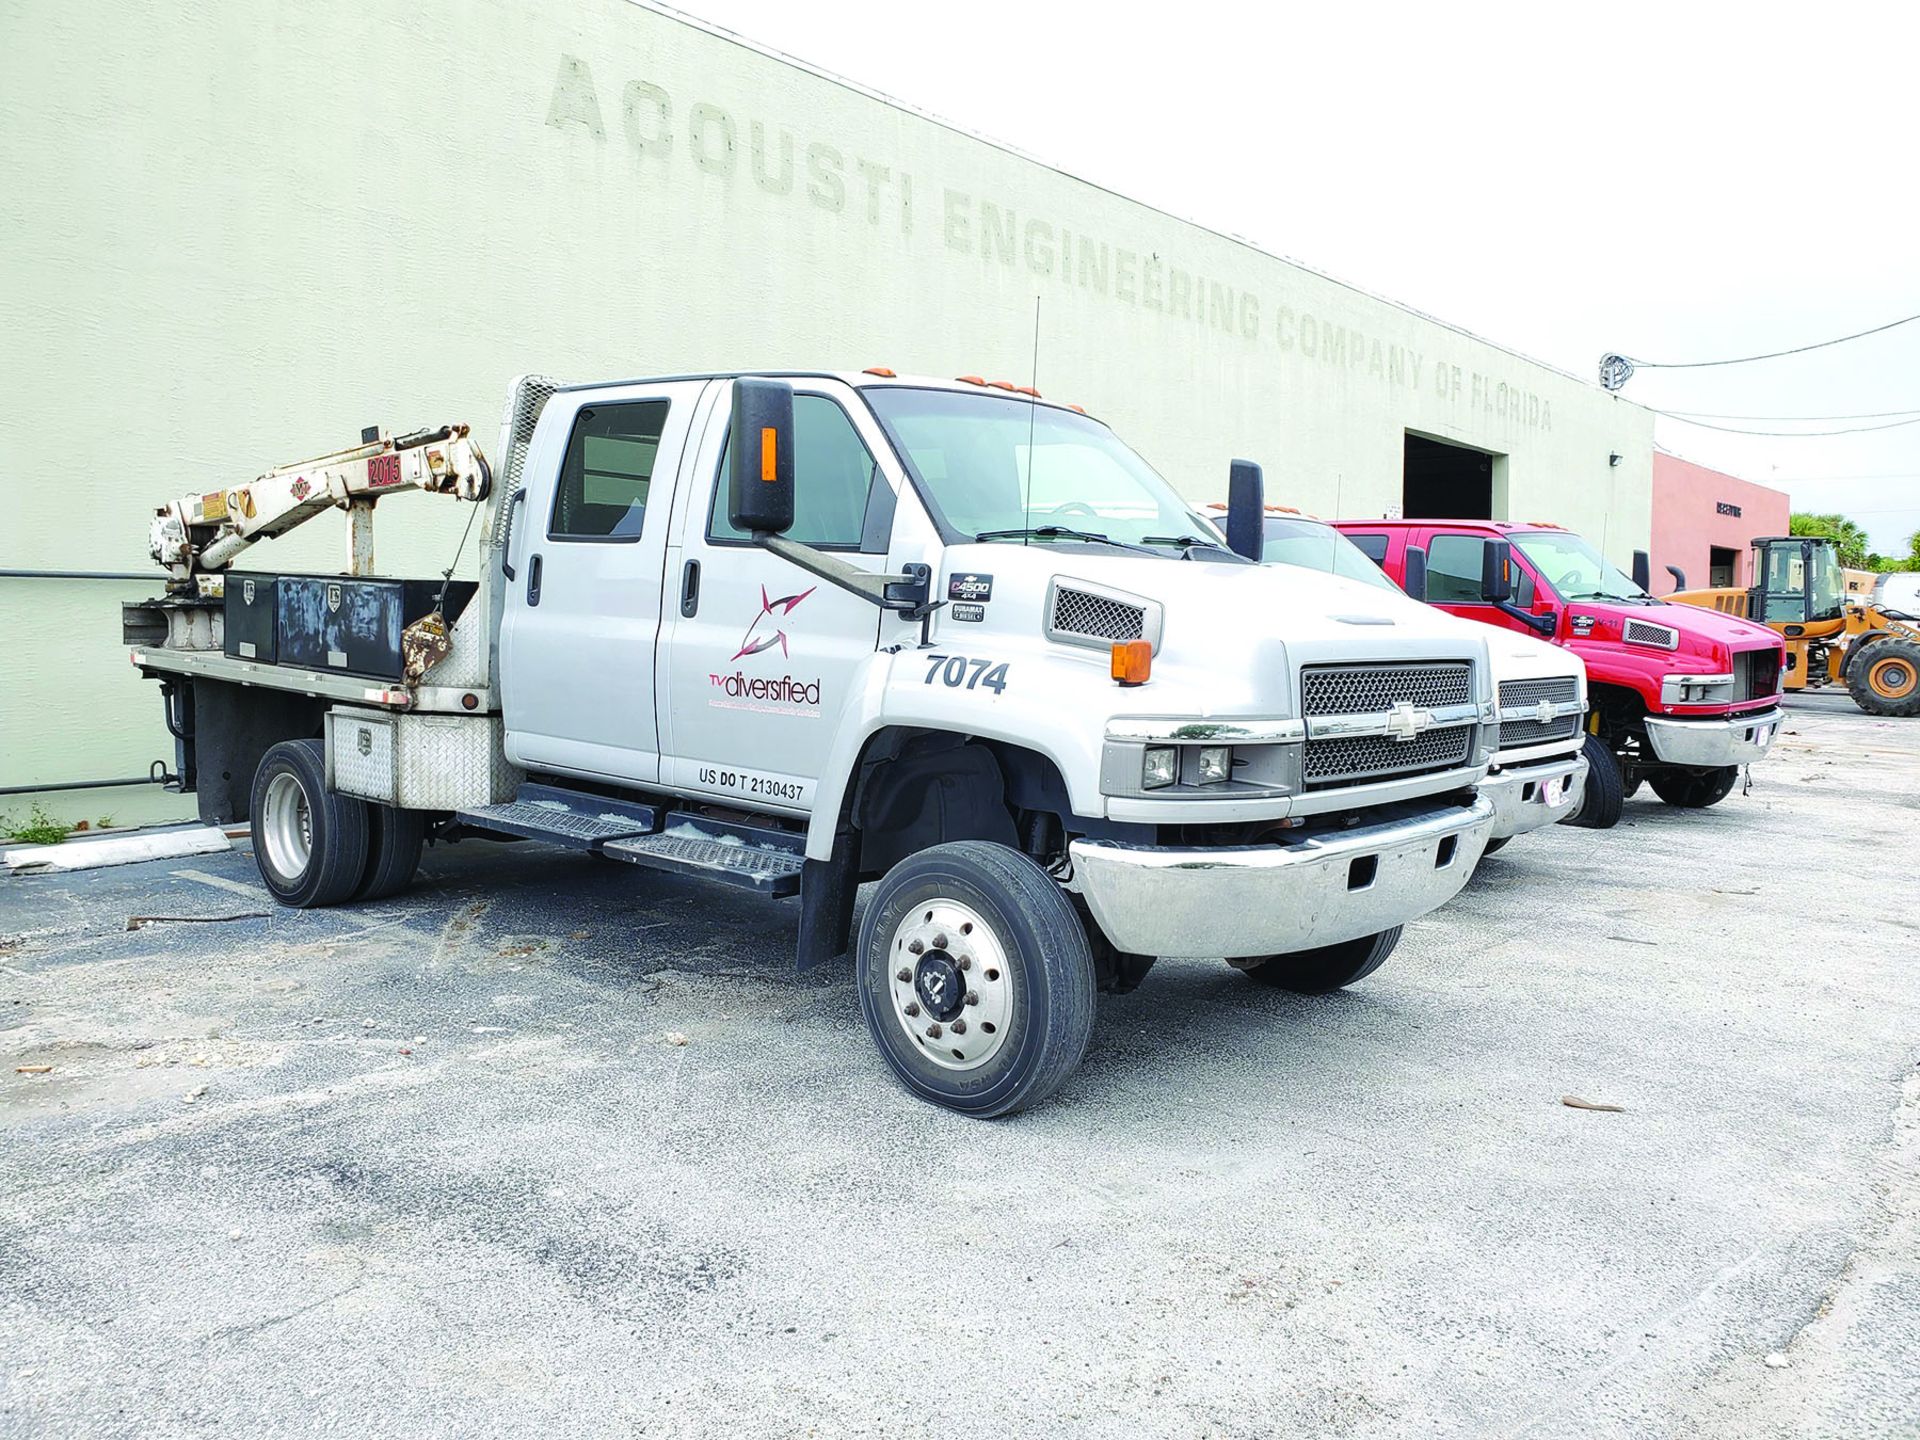 2006 CHEVROLET C4500 4X4 CREW CAB FLAT/STAKE BED TRUCK W/IMT 2015 TELESCOPING BOOM, 2.5 TON HOOK, - Image 8 of 19